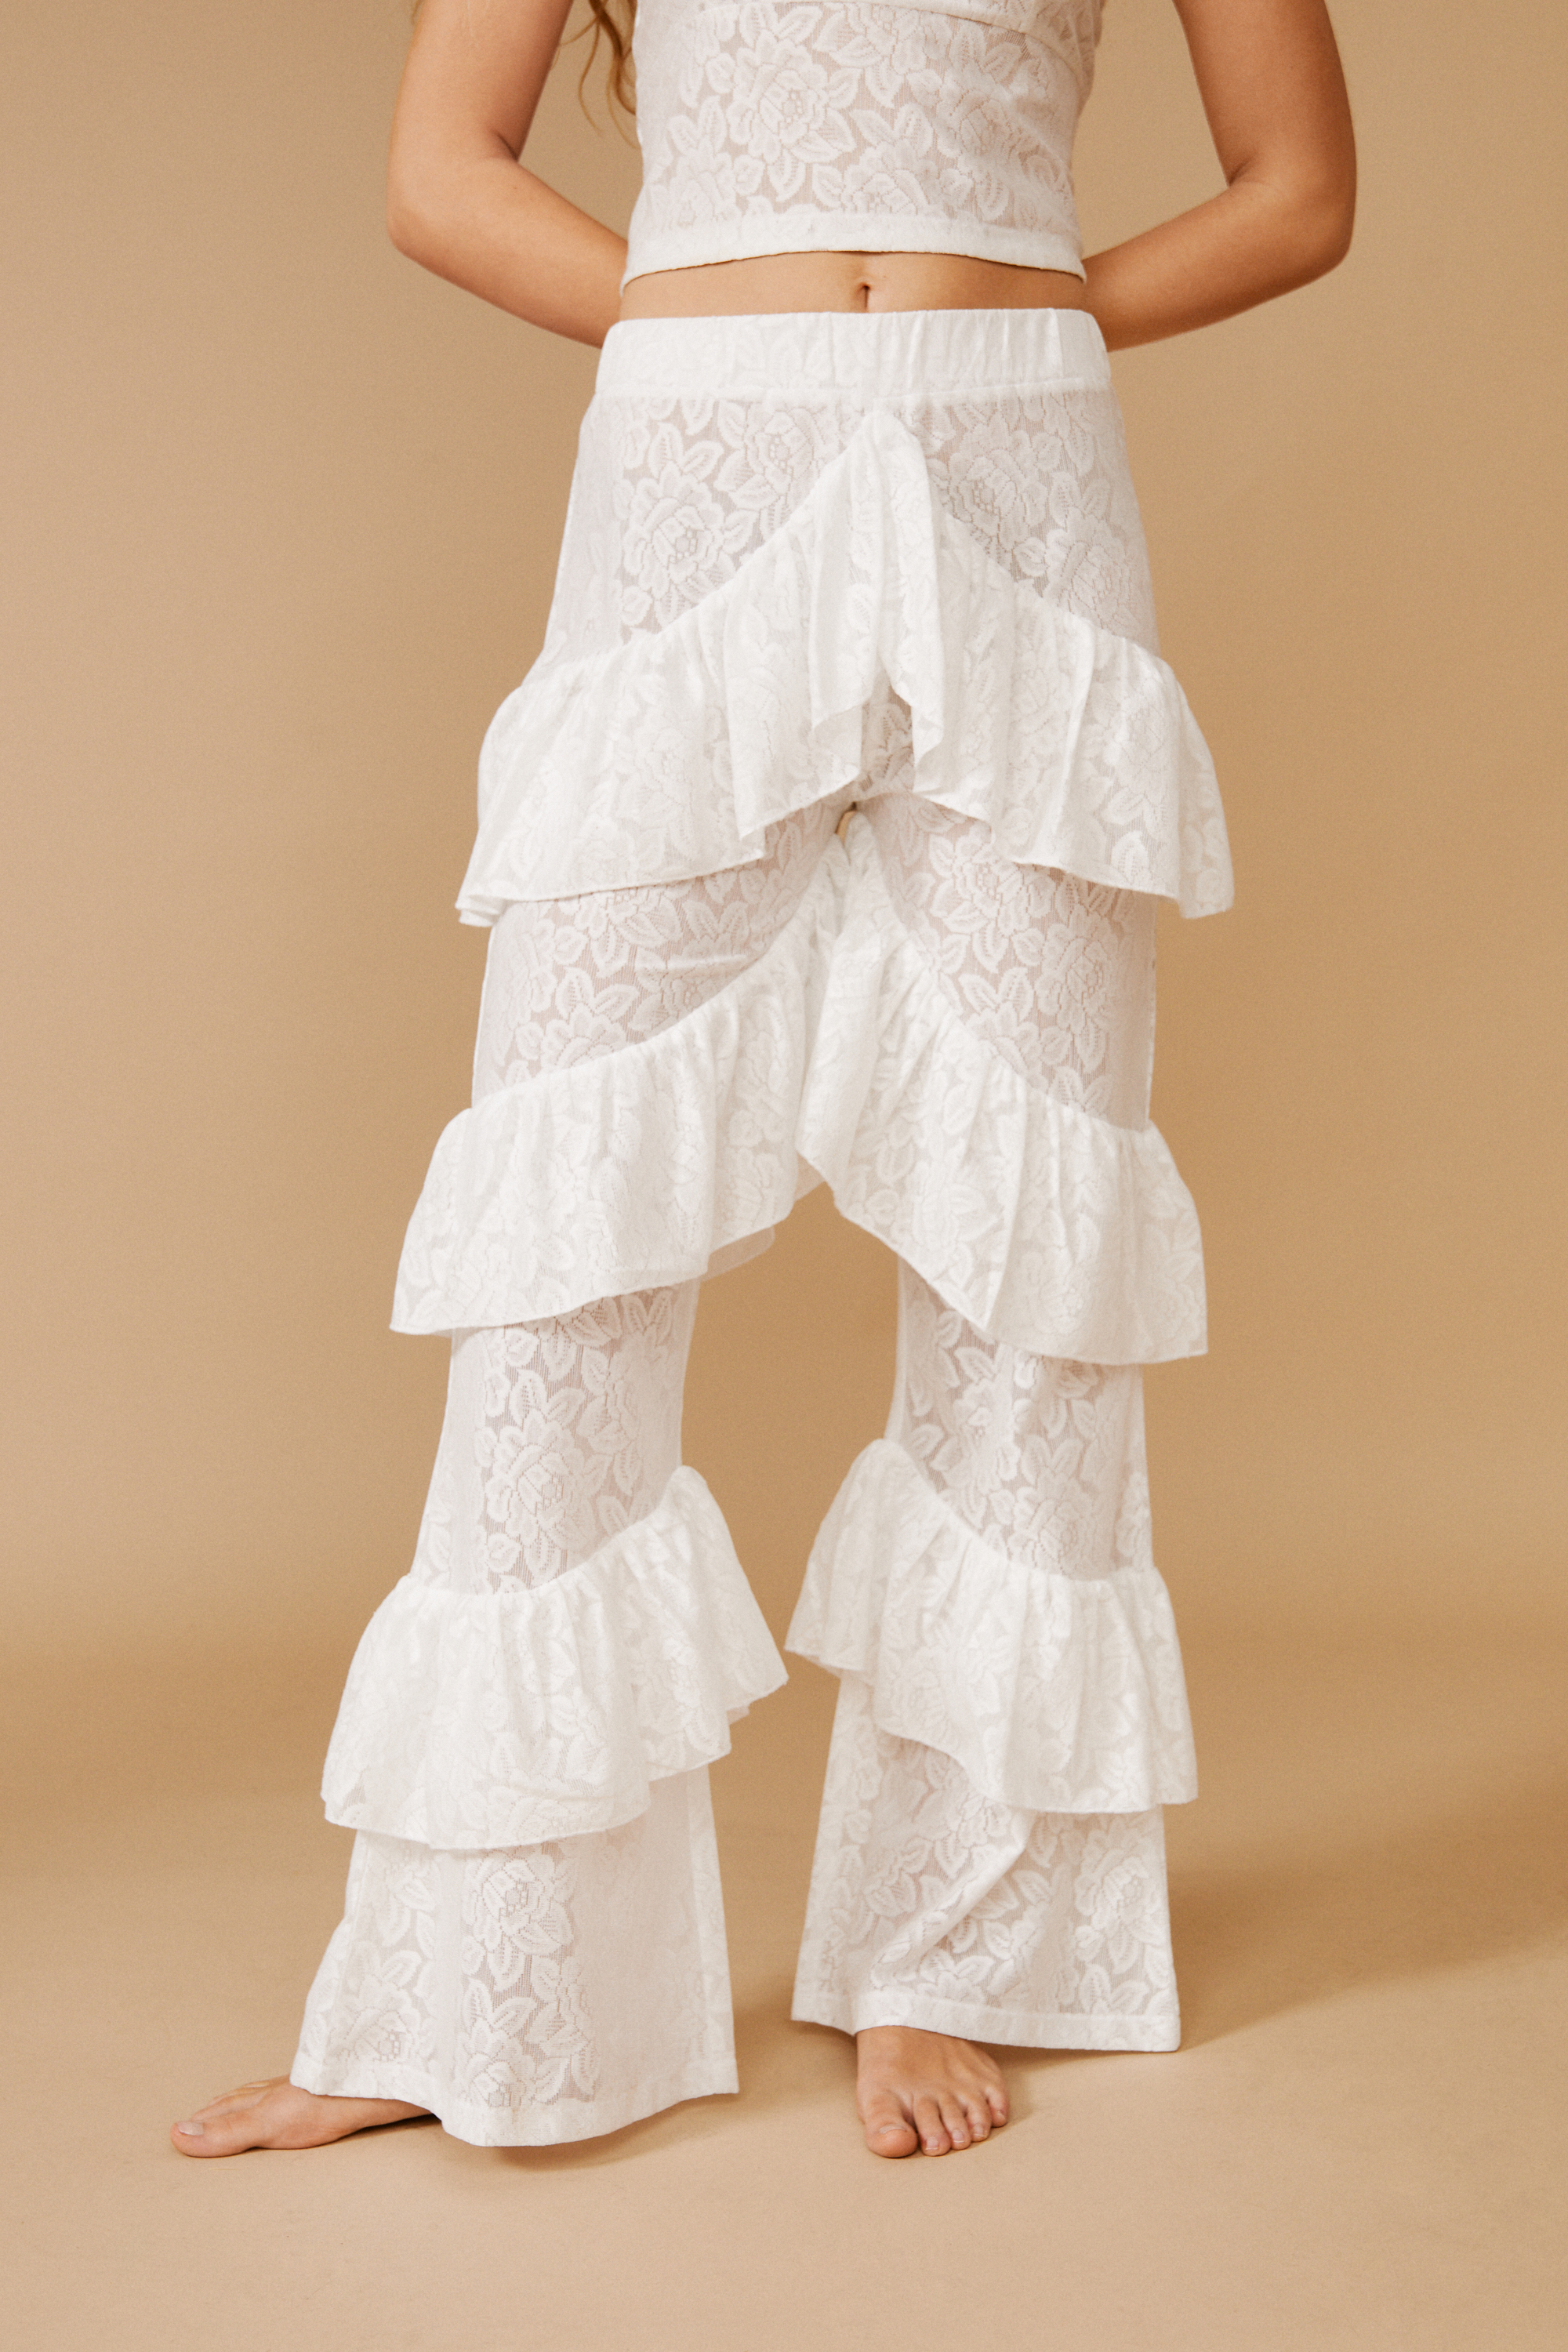 Lace Frill Flare Pants